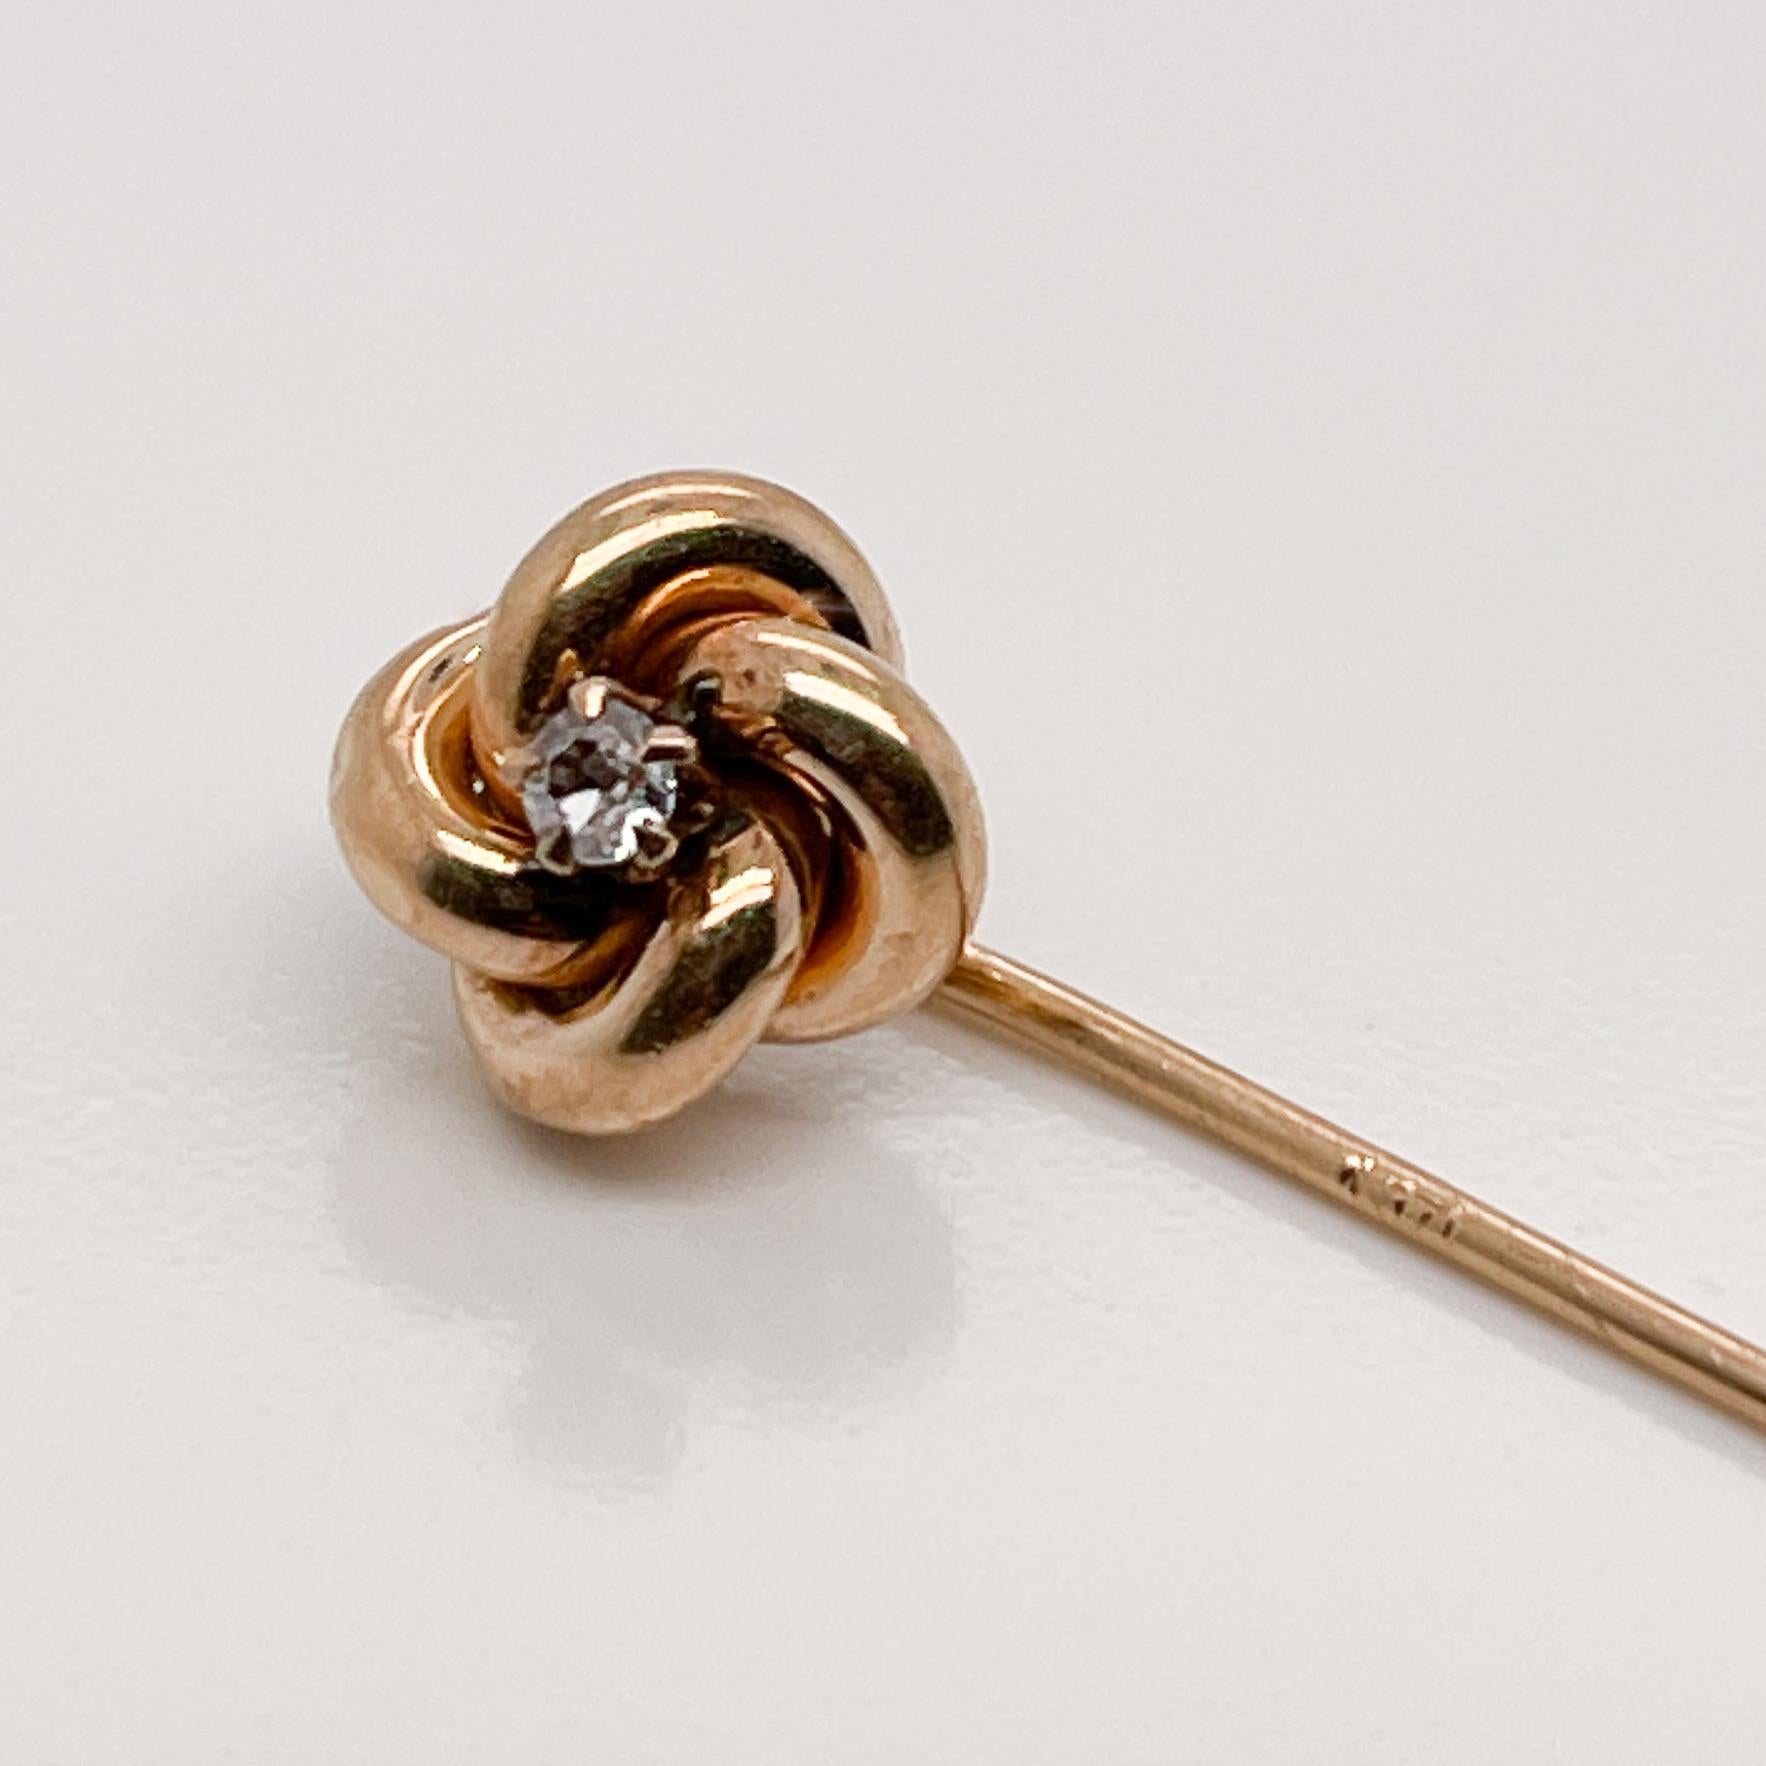 Antique Edwardian 10 Karat Gold & Diamond Love Knot Stick Pin In Good Condition For Sale In Philadelphia, PA